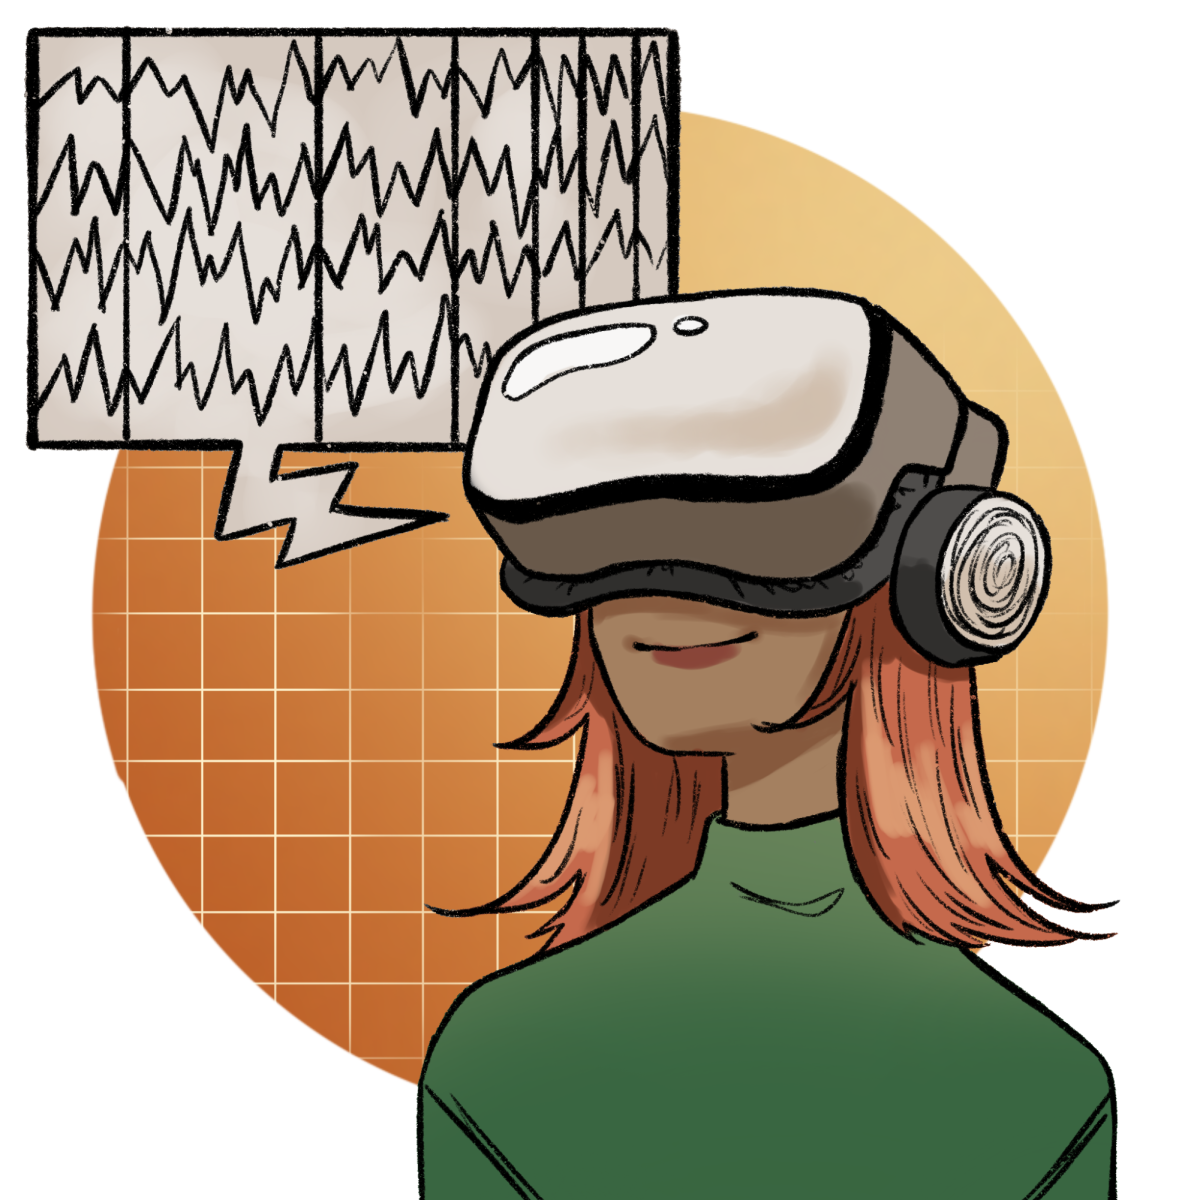 UT researchers develop modified VR headset to monitor brain activity